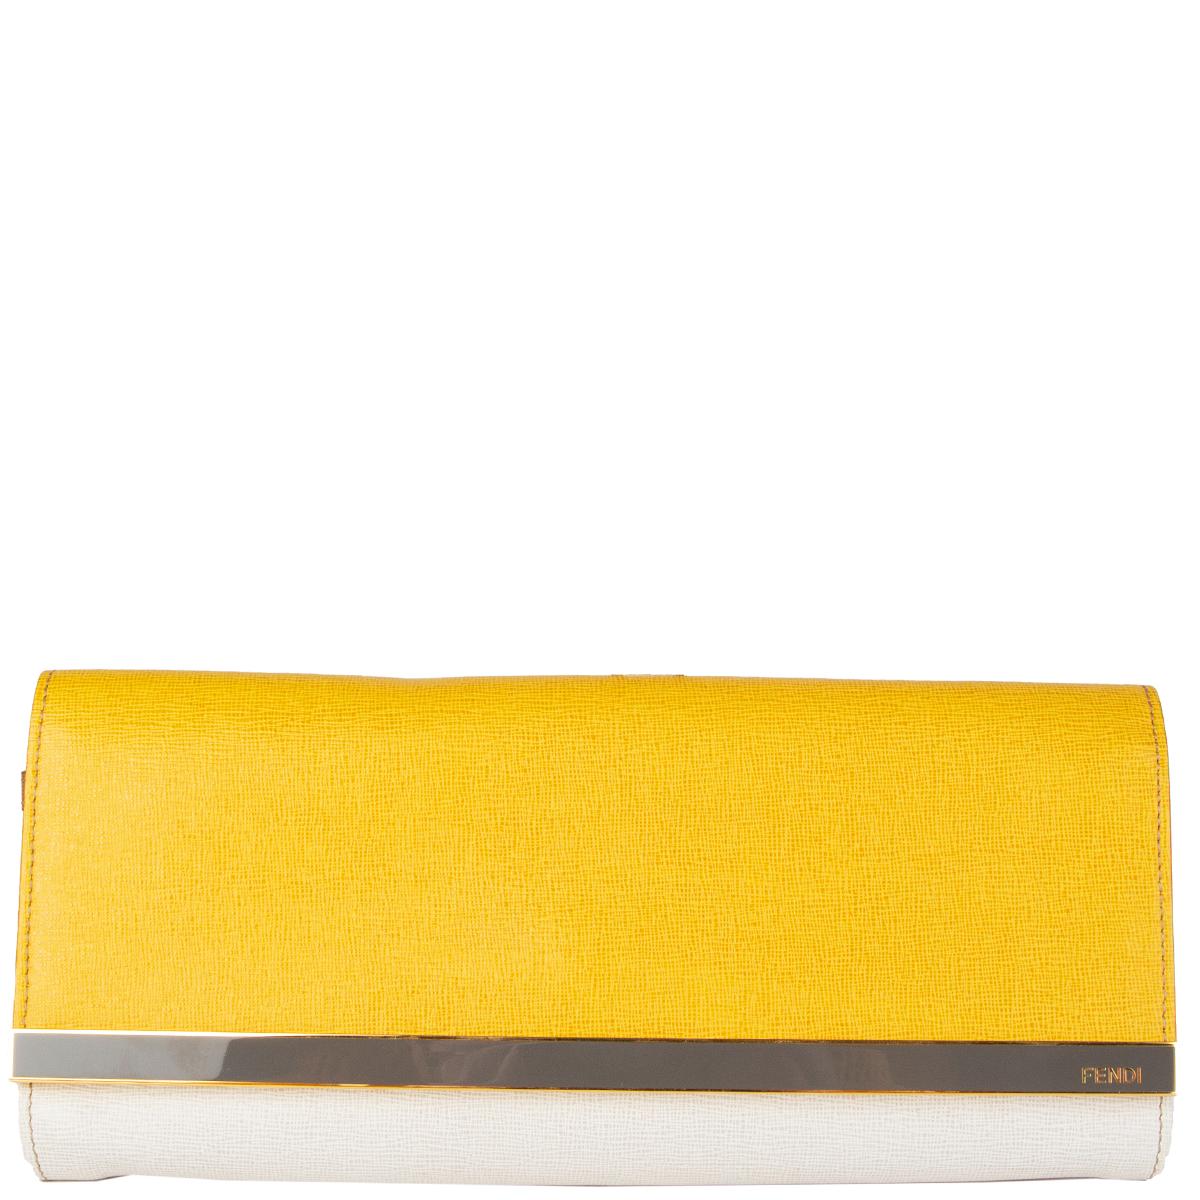 Fendi colorblock wristlet clutch in yellow, white, grey and beige Saffiano leather.Opens with a magnetic button under the flap and is lined in monogram canvas with a zipper pocket in the middle. Has been carried and is in excellent condition. 